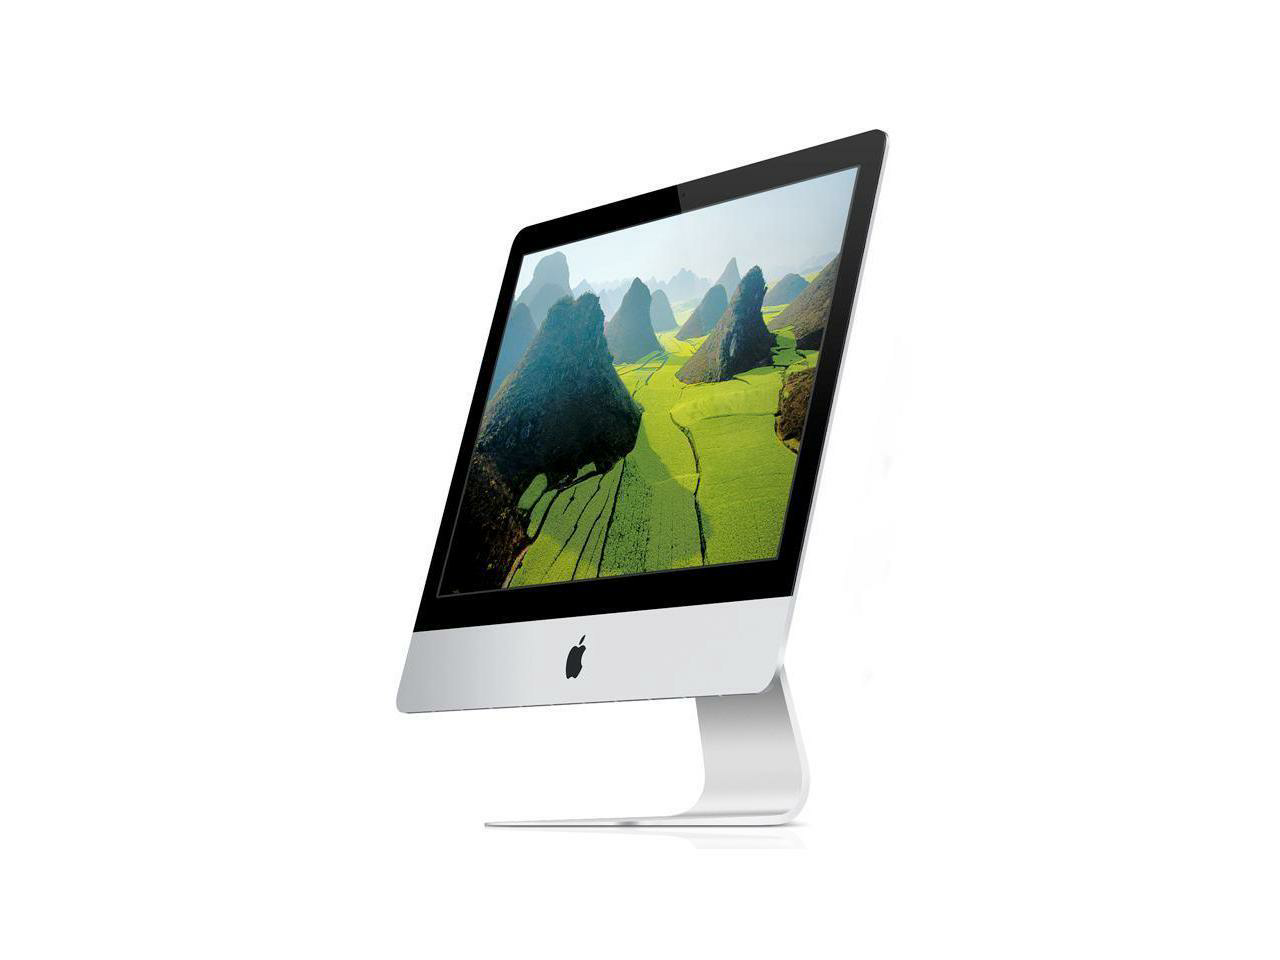 Apple iMac stock 2015 - 21.5 inch All in One